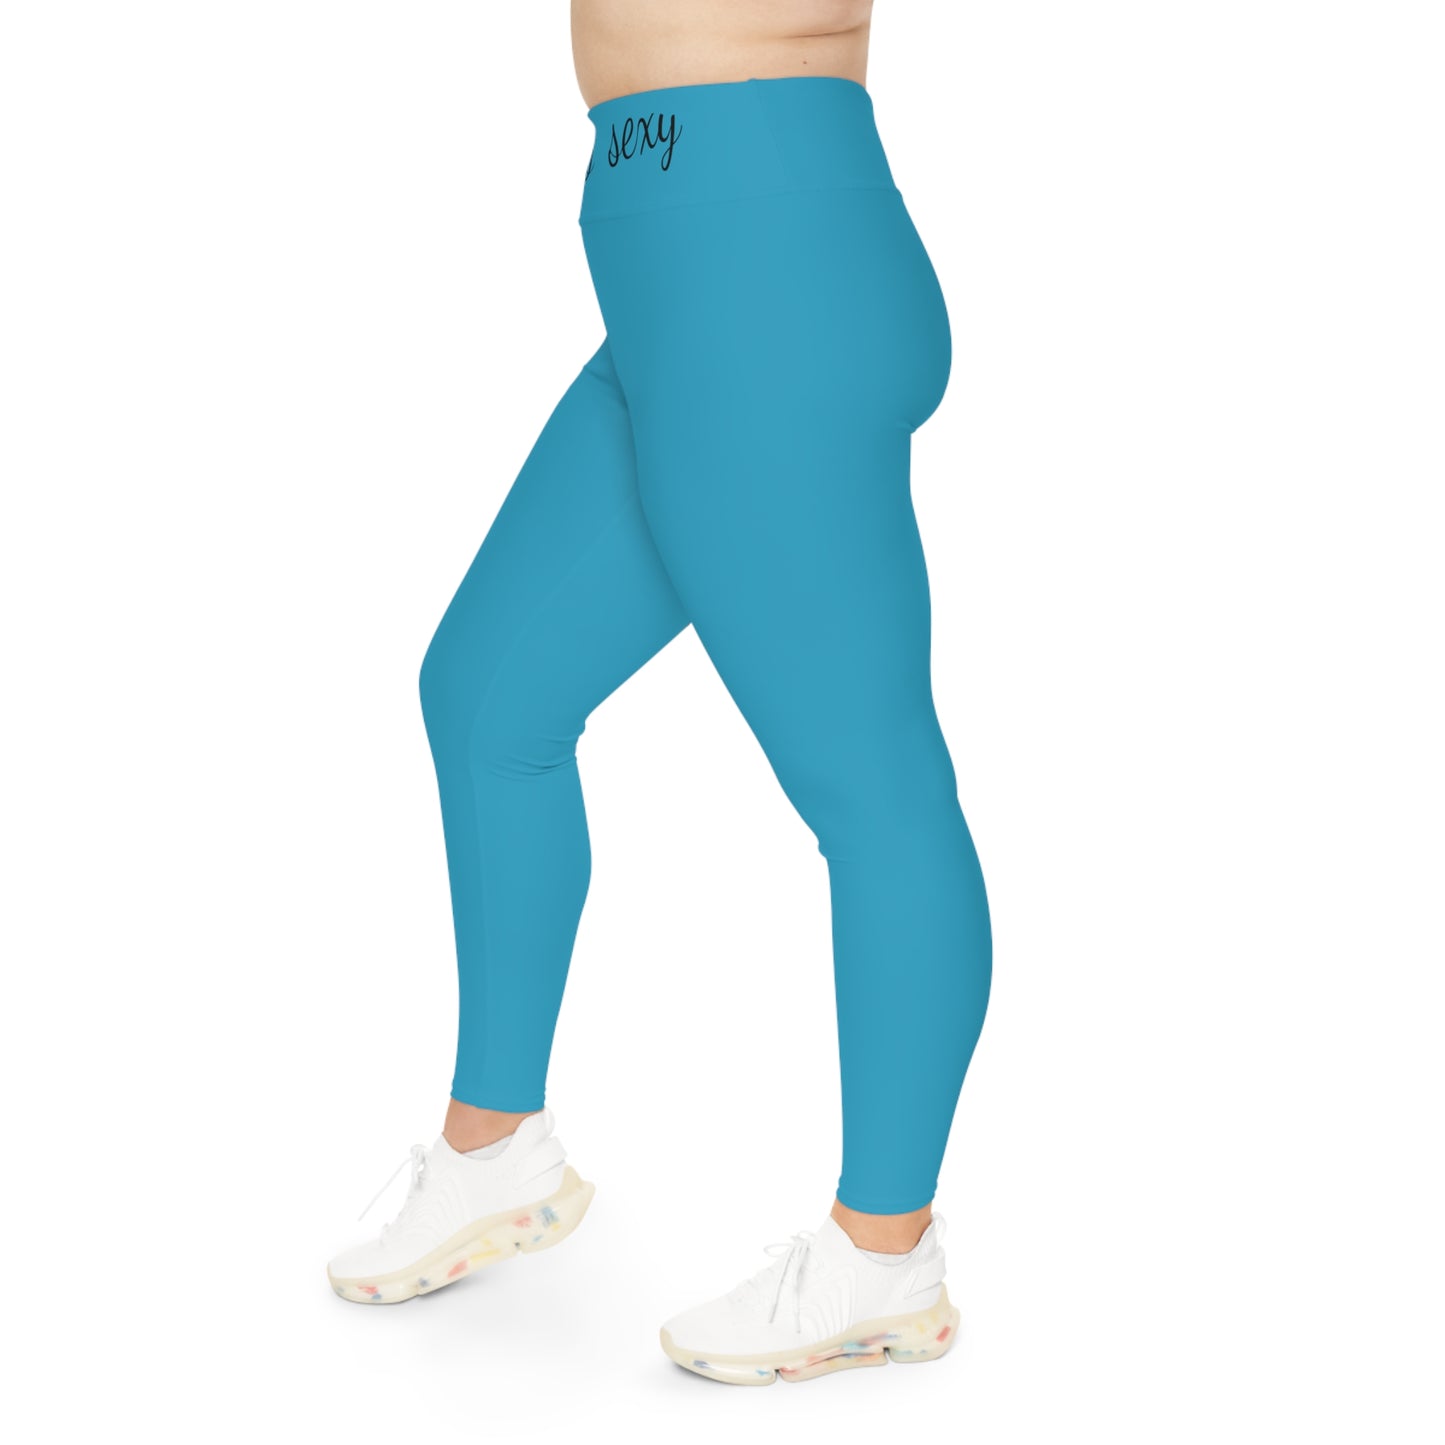 Can you handle the curves? Turquoise: Plus Size Leggings